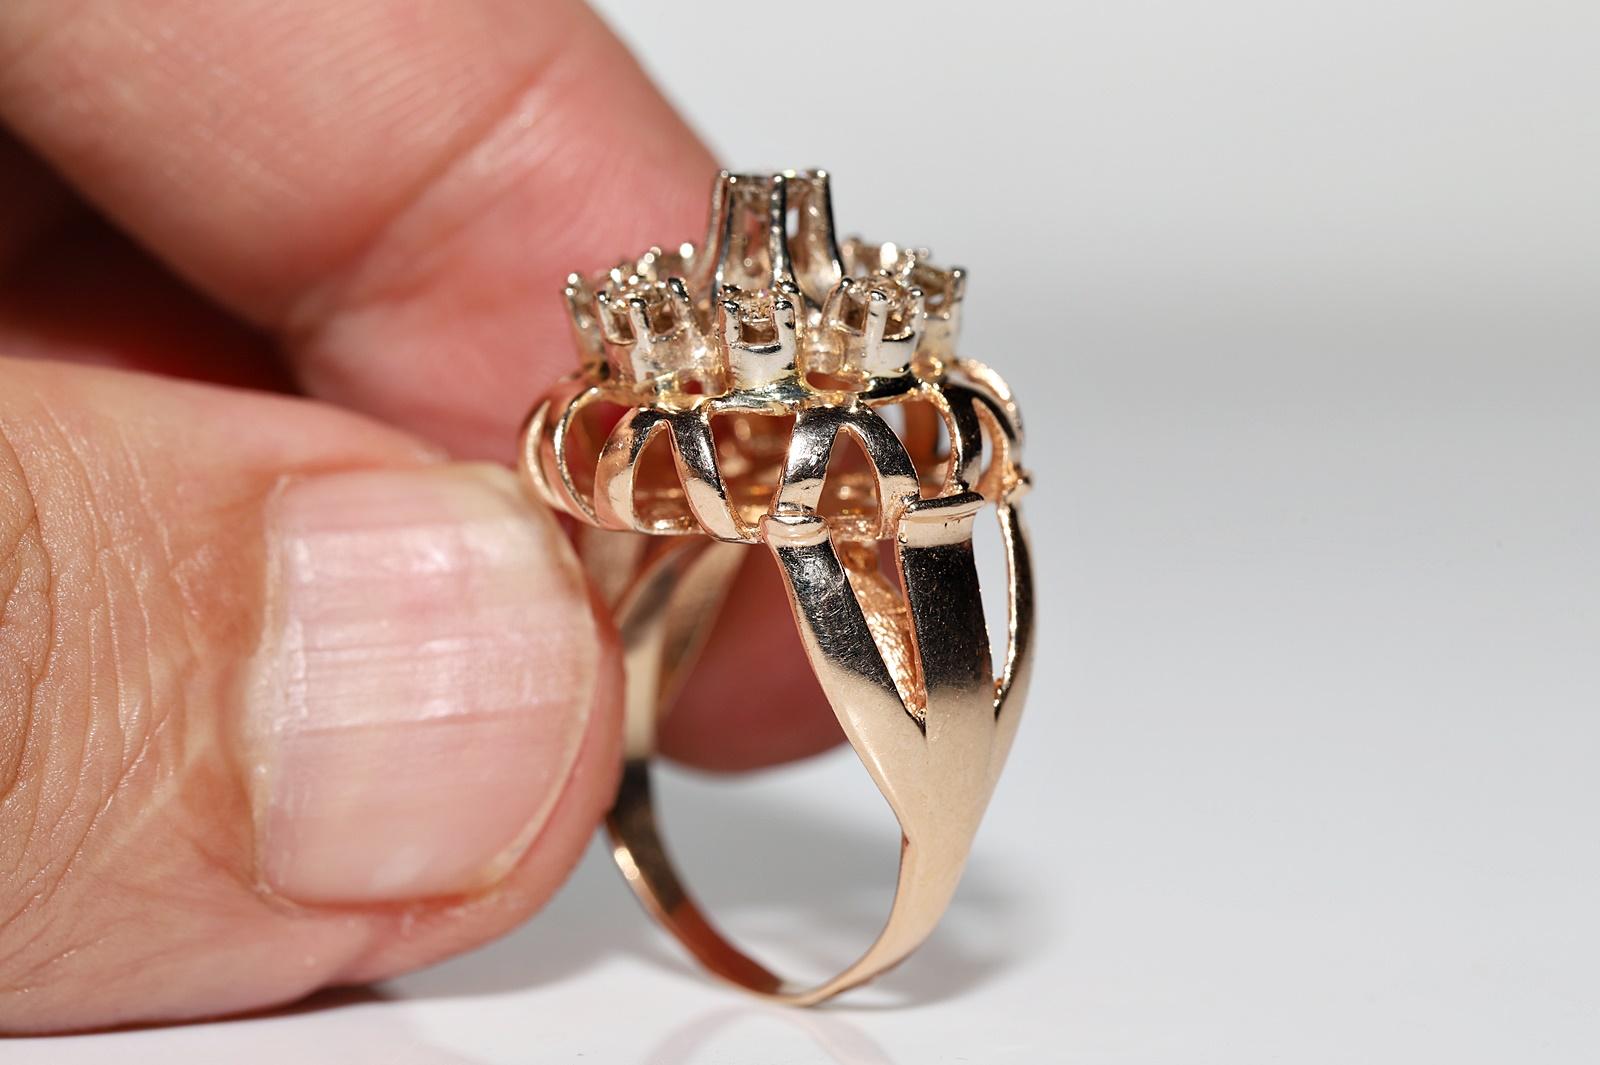 Vintage Circa 1960s 14k Gold Natural Diamond Decorated Ring For Sale 5